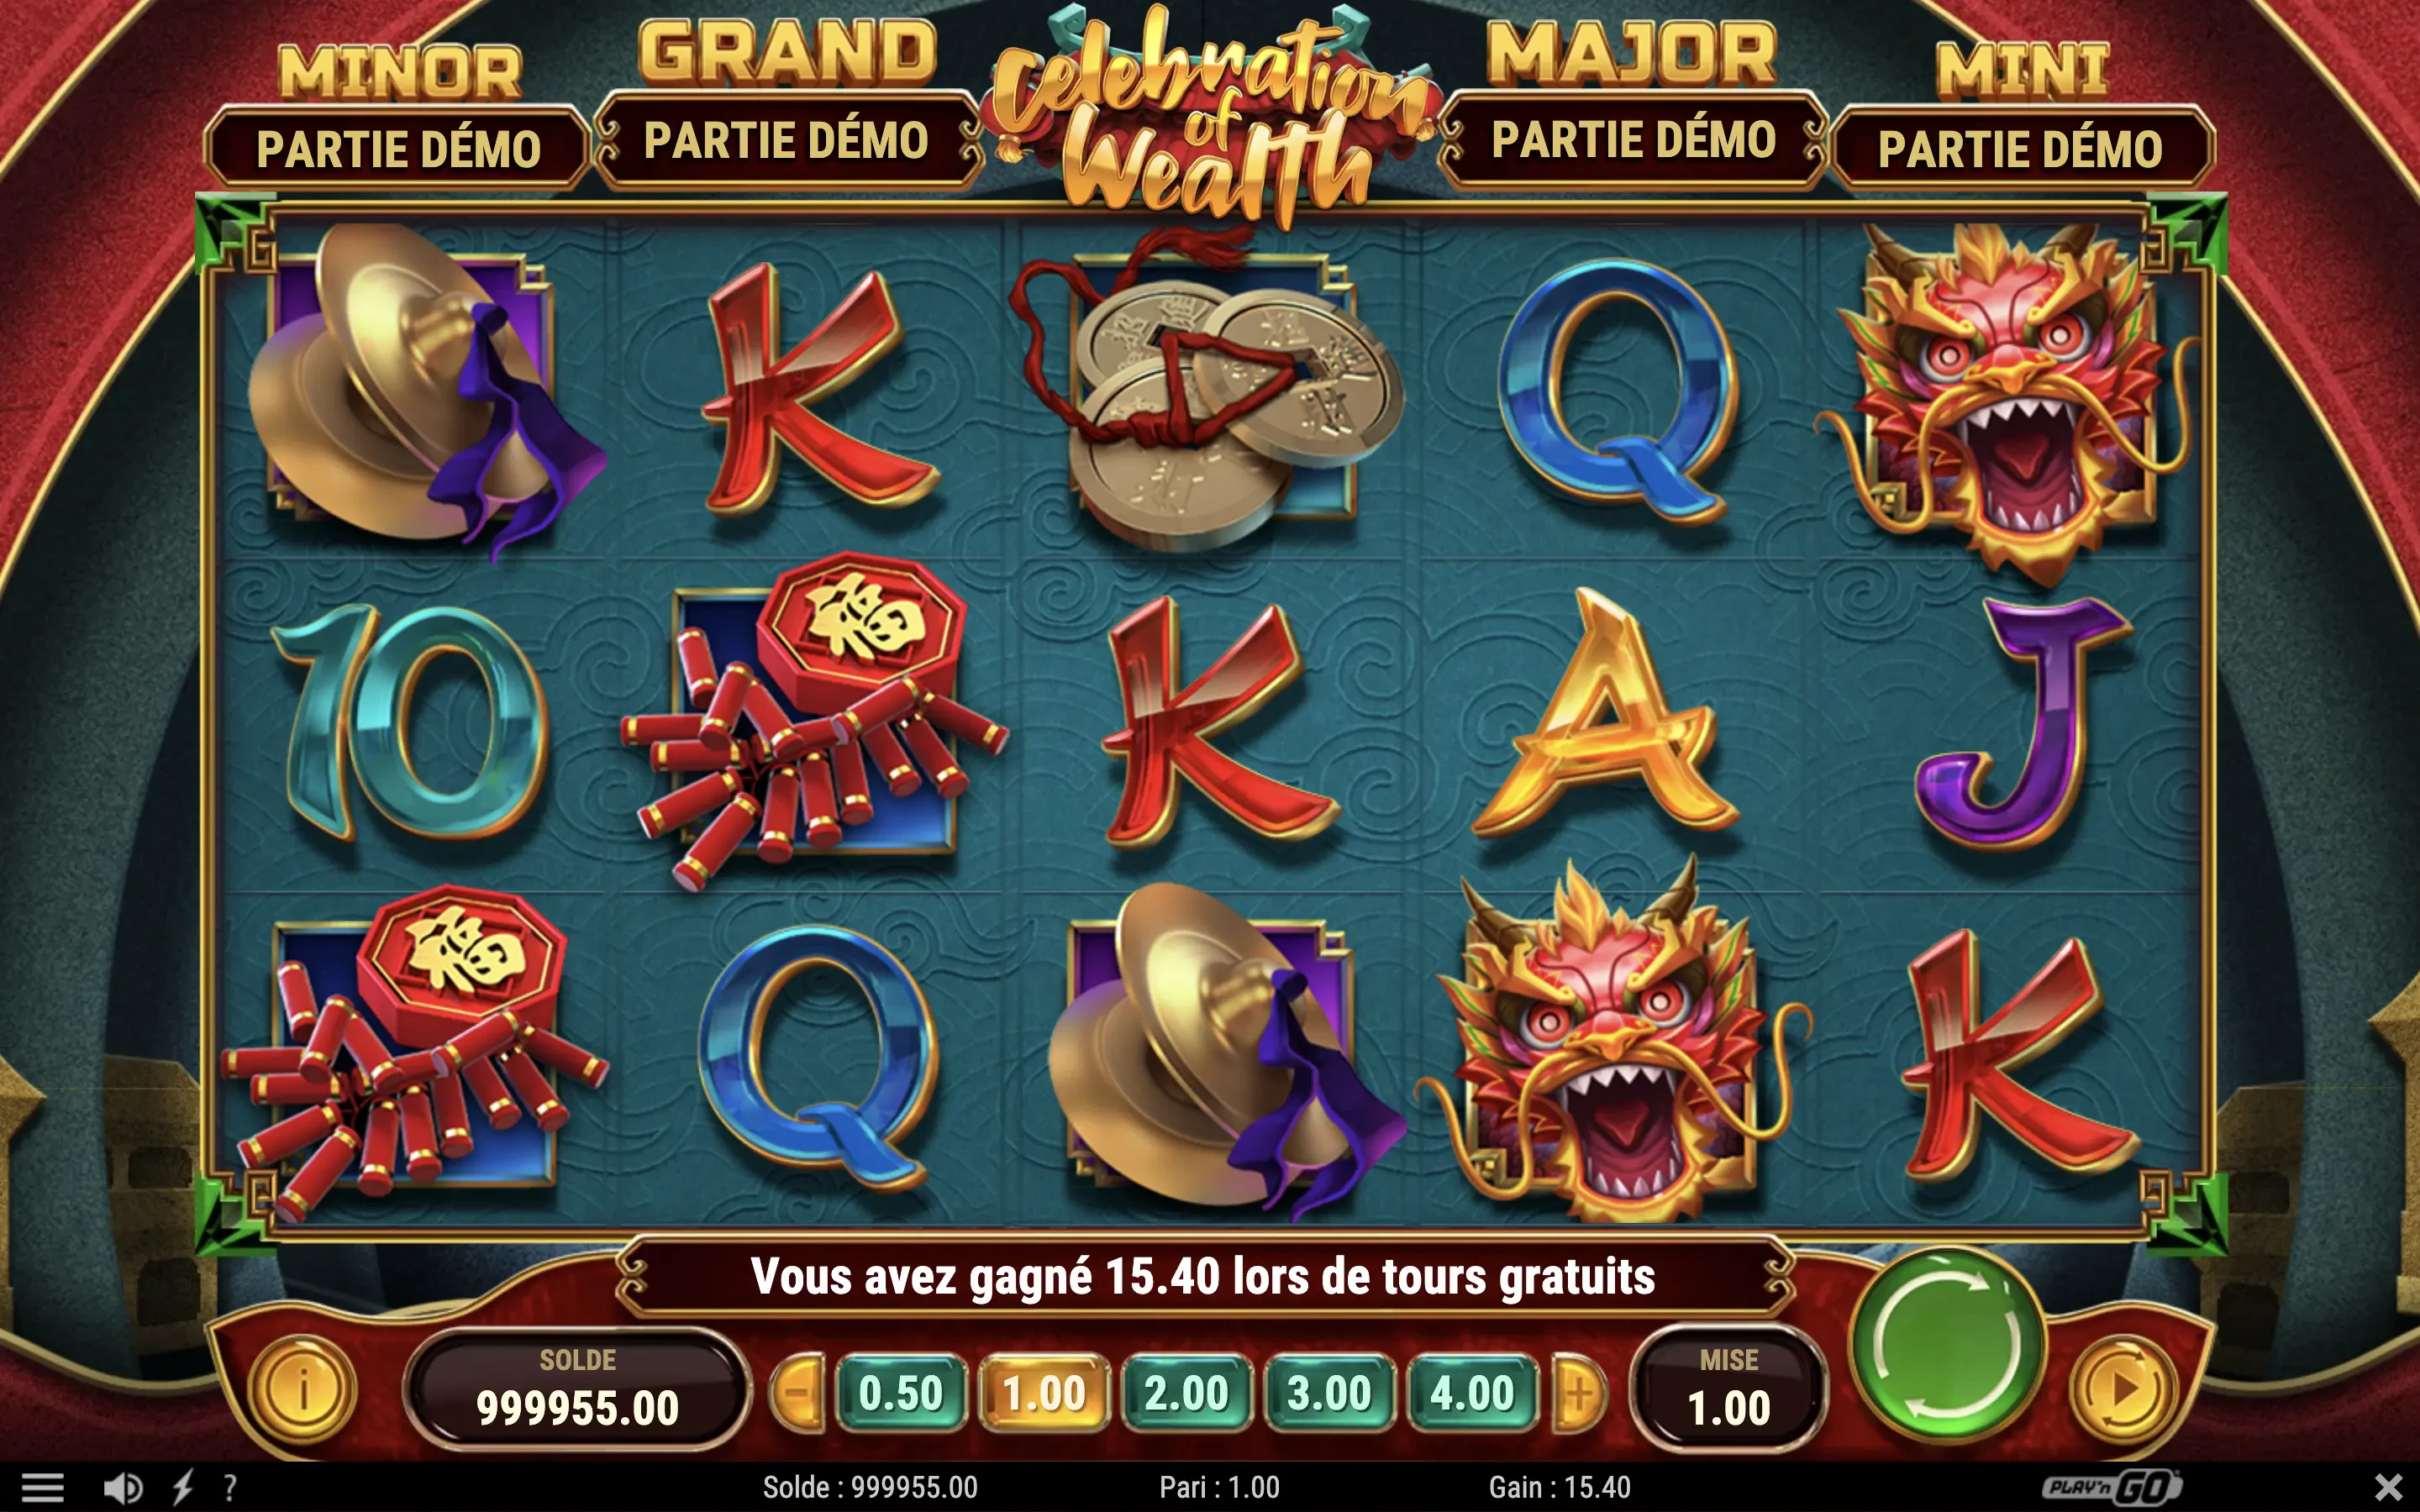 The Celebration of Wealth slot machine by Play'n GO